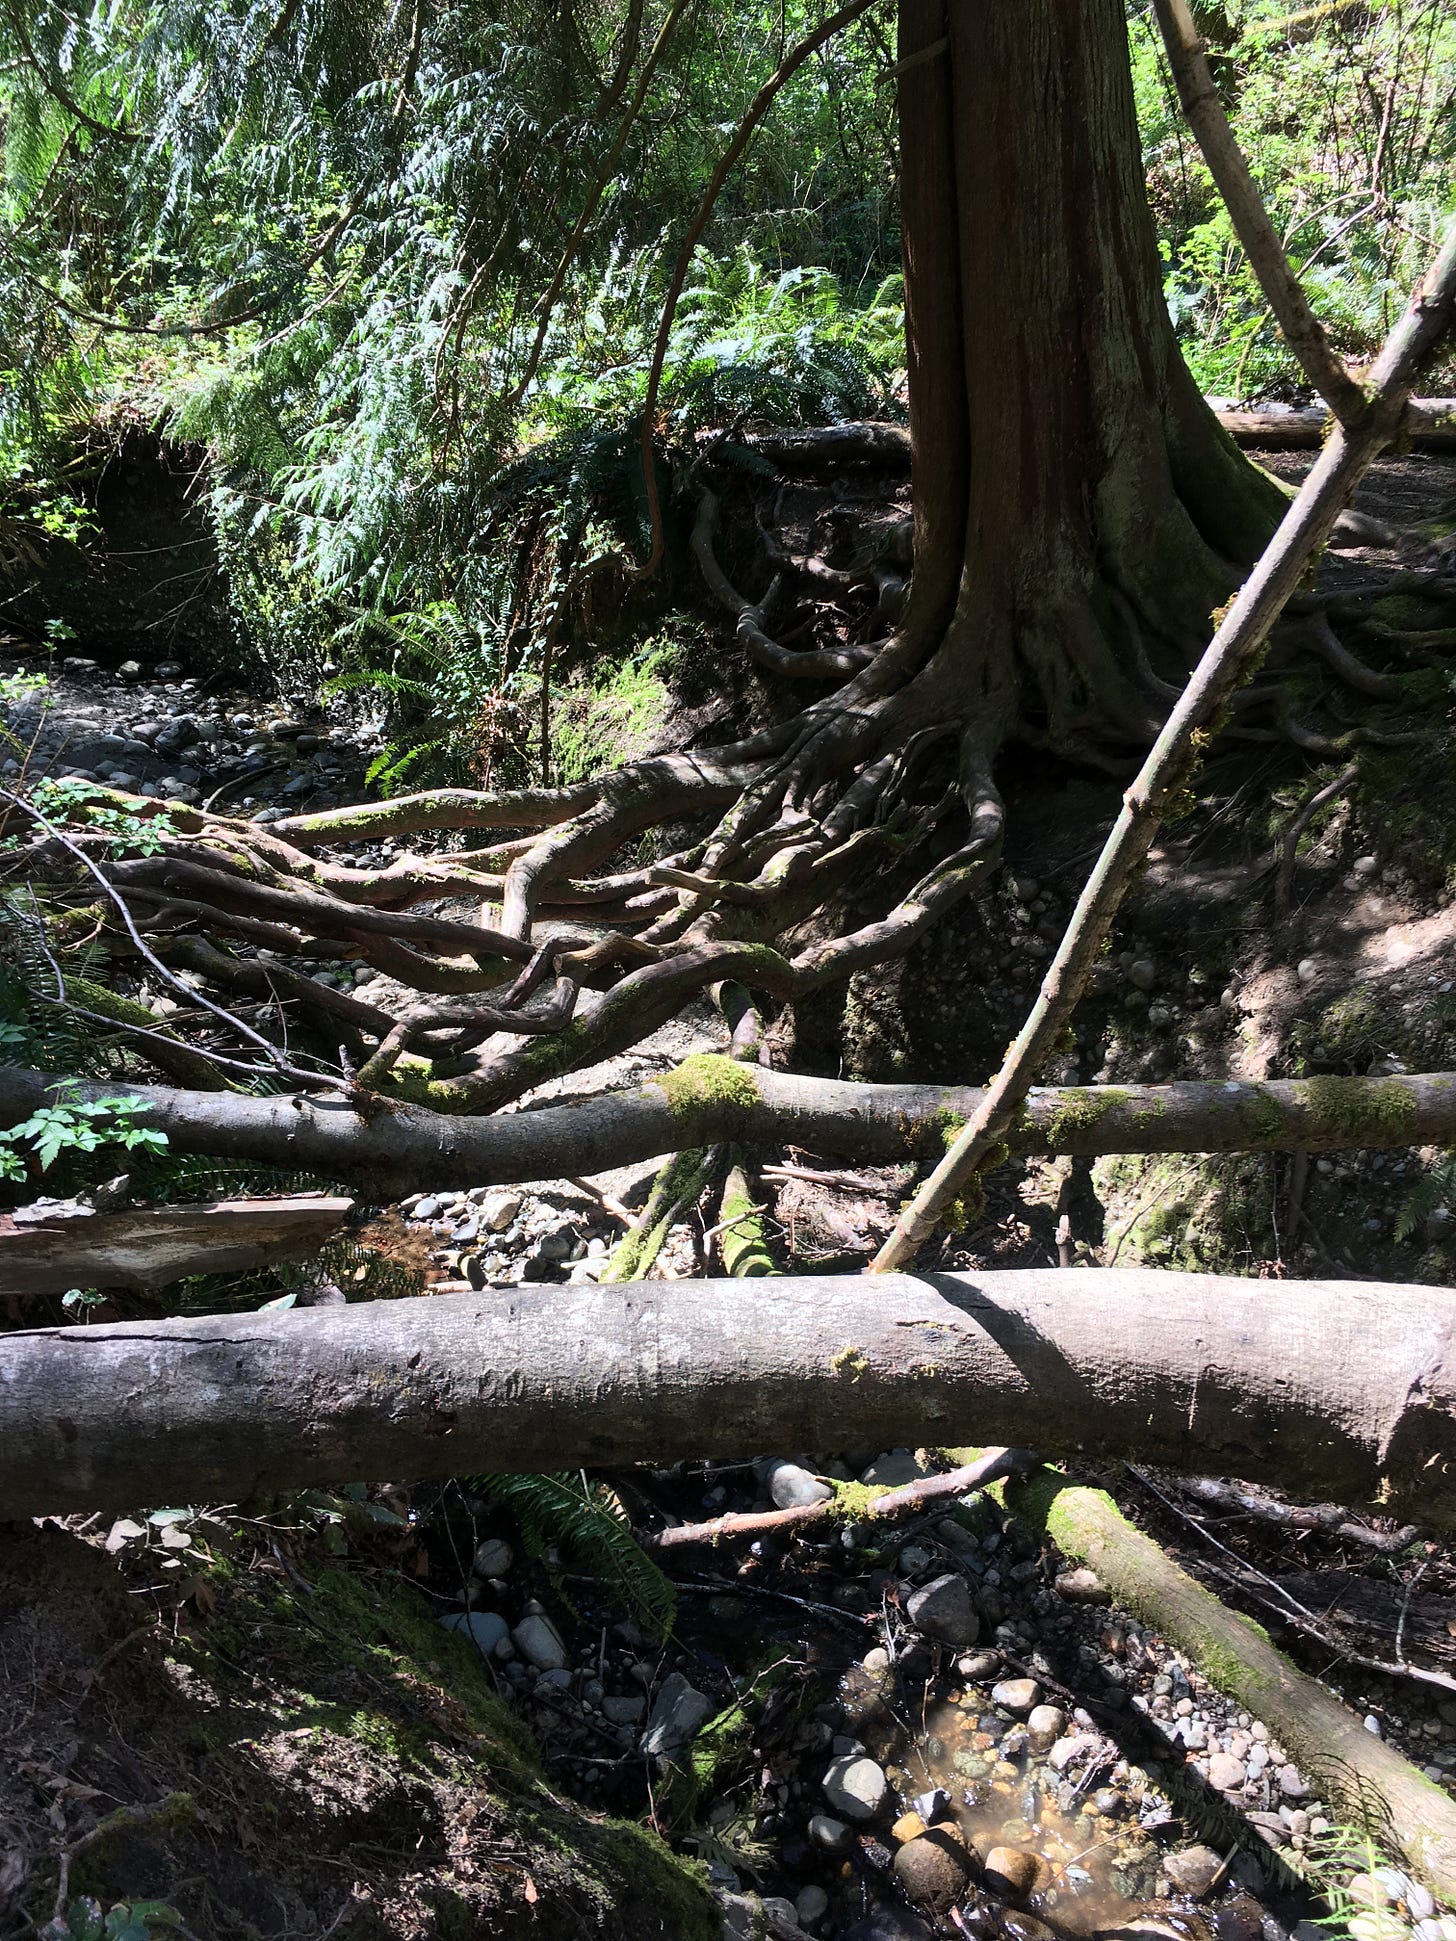 focal point is intricate web of roots that have grown spanning over an almost empty creek bed. tree is on right side of creekbed that has the roots growing to the other side. green ferns and tree branches are behind and surrounding tree, moss covers some of the fallen trees spanning the creek bed.